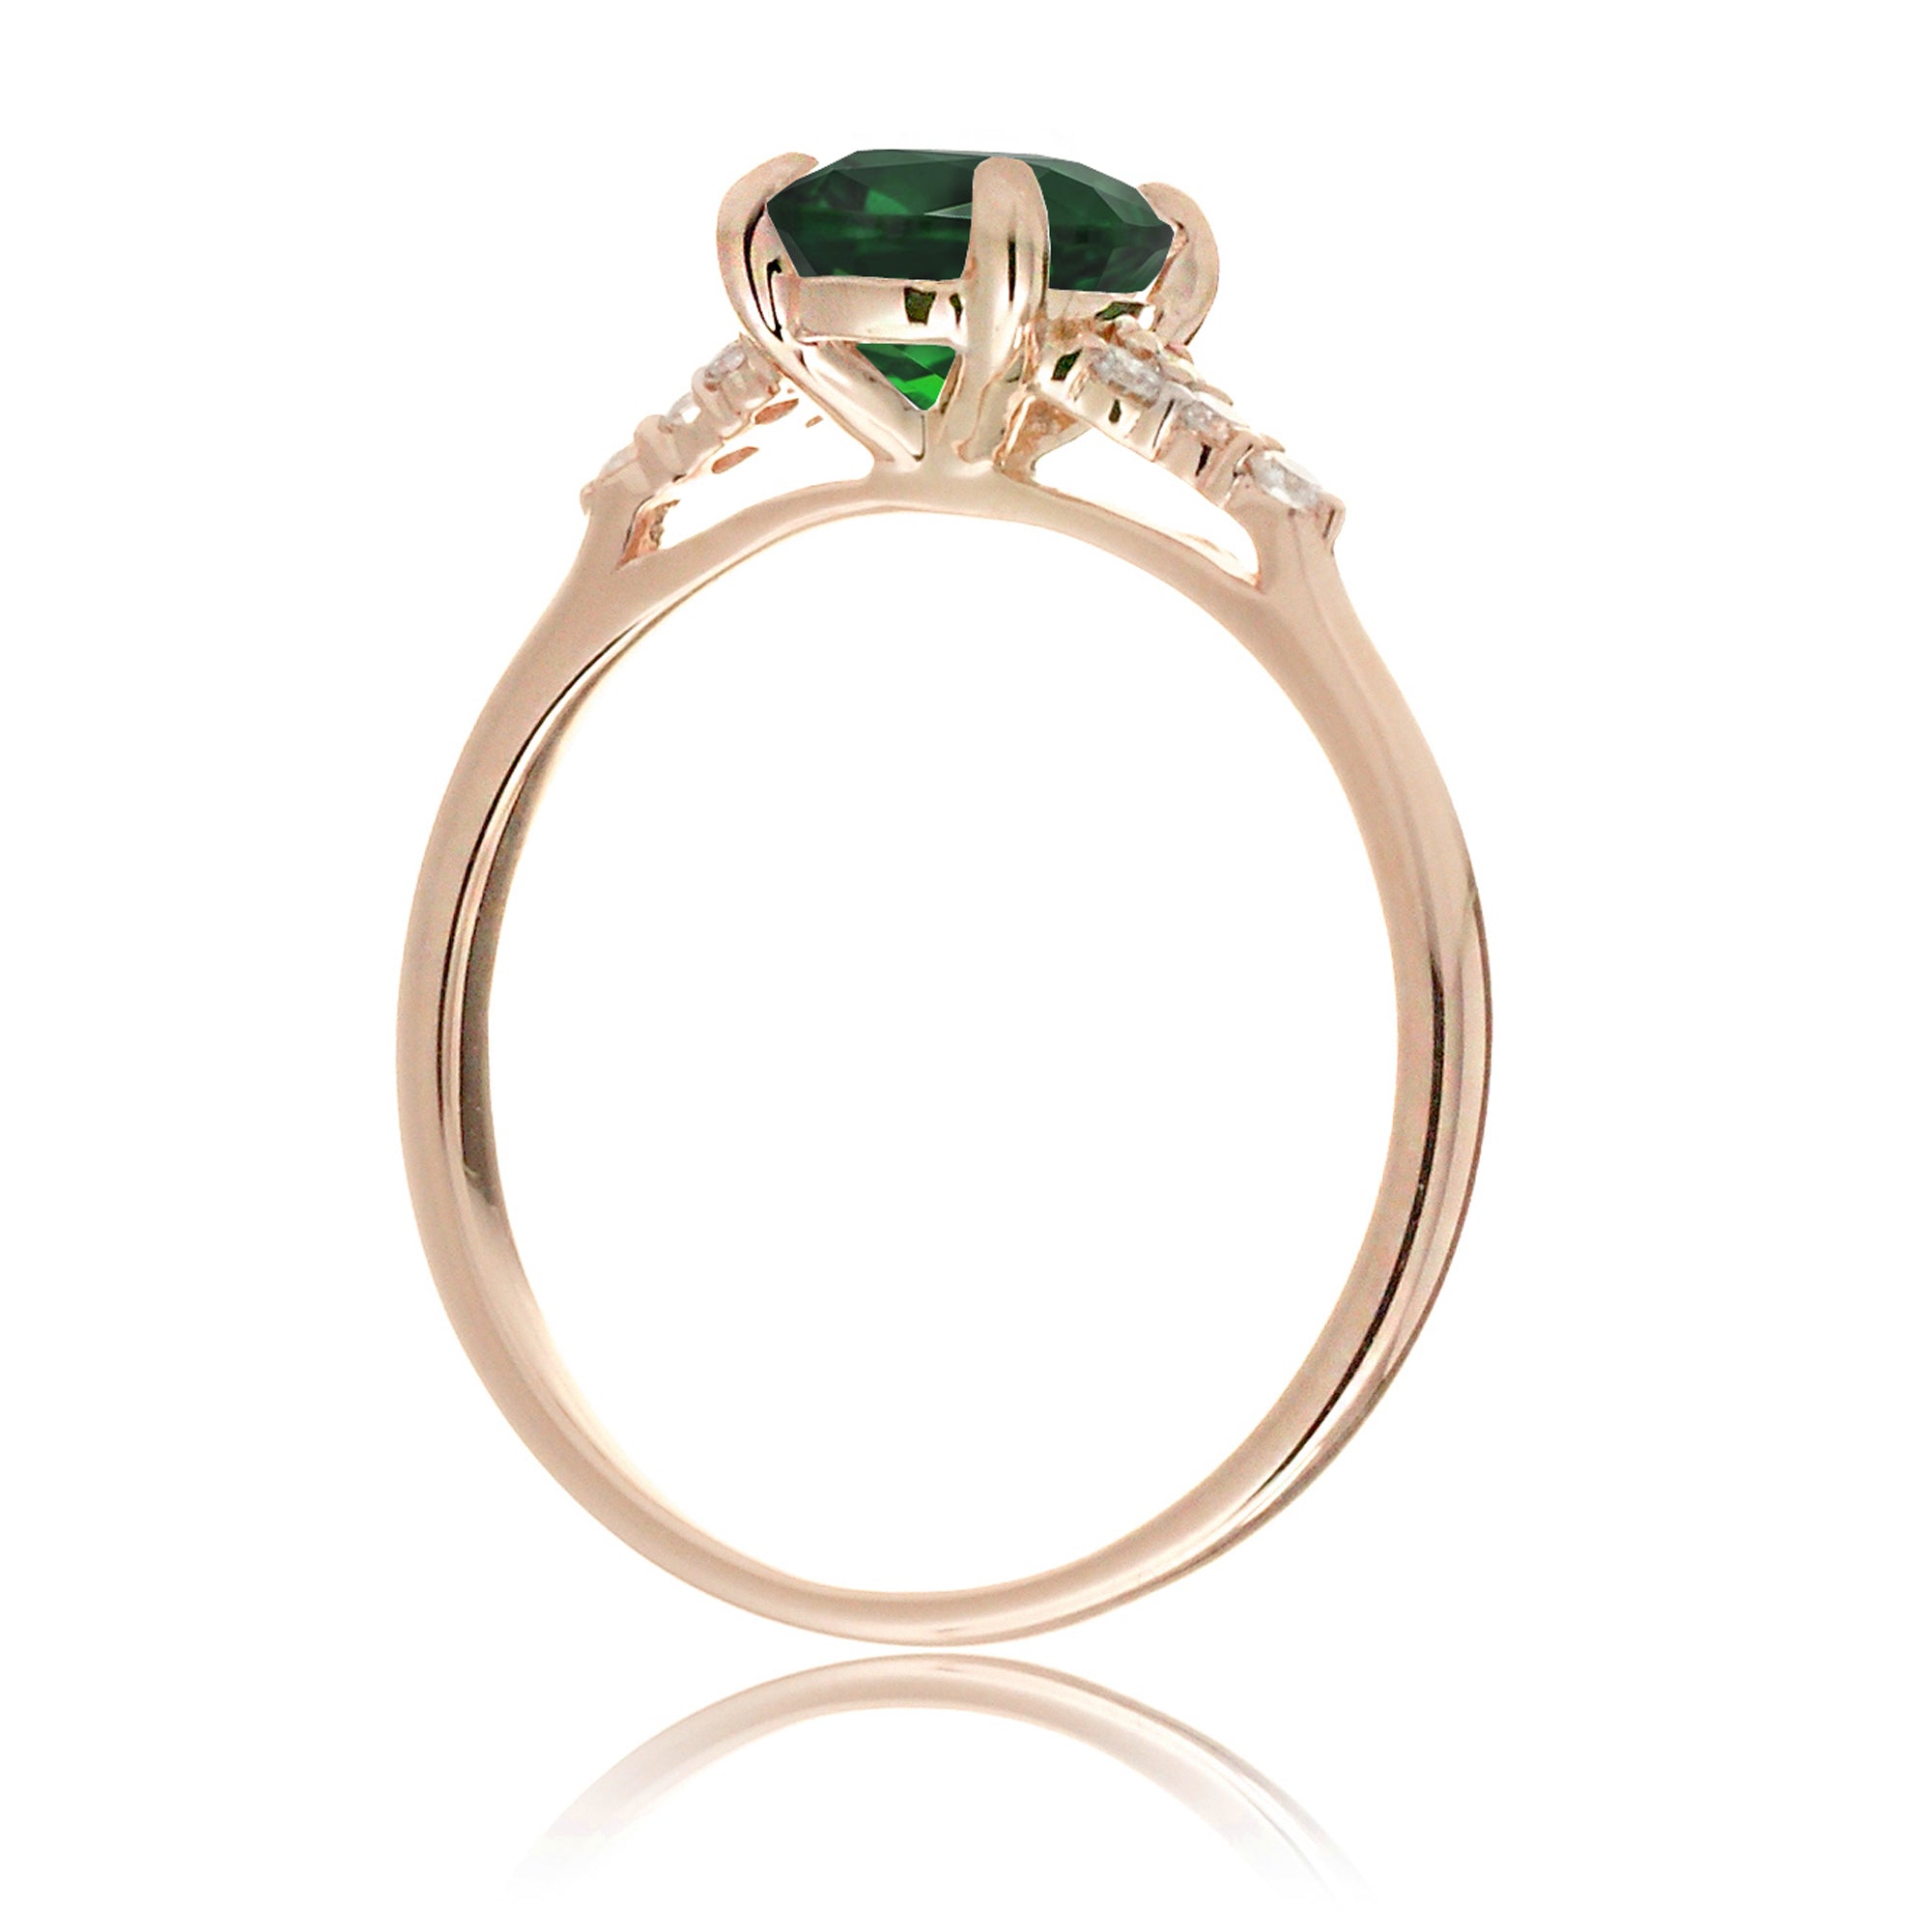 Round cut green emerald and diamond ring in rose gold